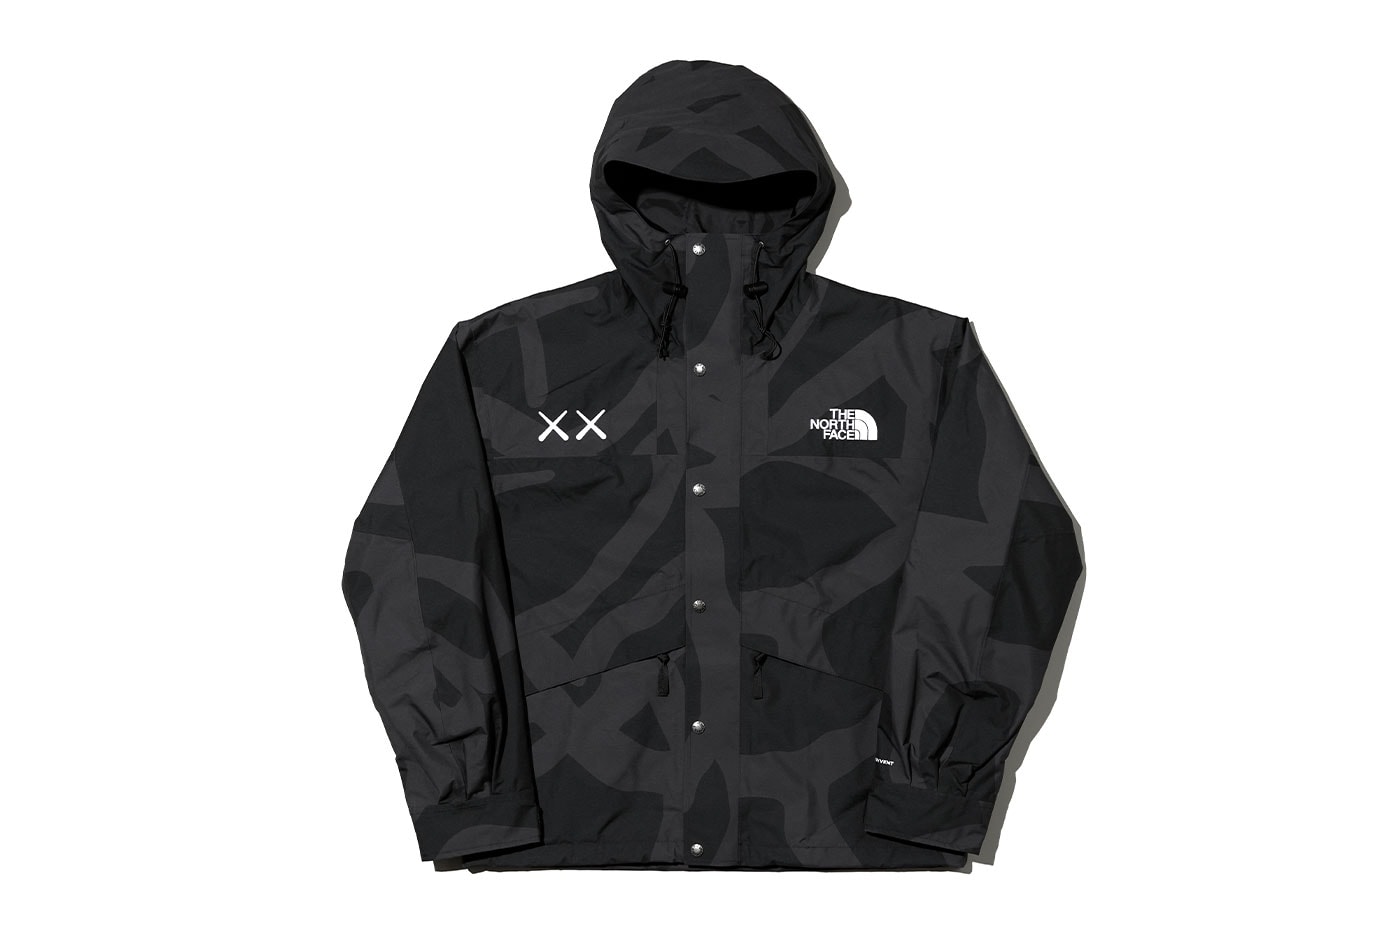 TNF The North Face x KAWS Hoodie tee mitts jacket parka product images pant mule release info date price